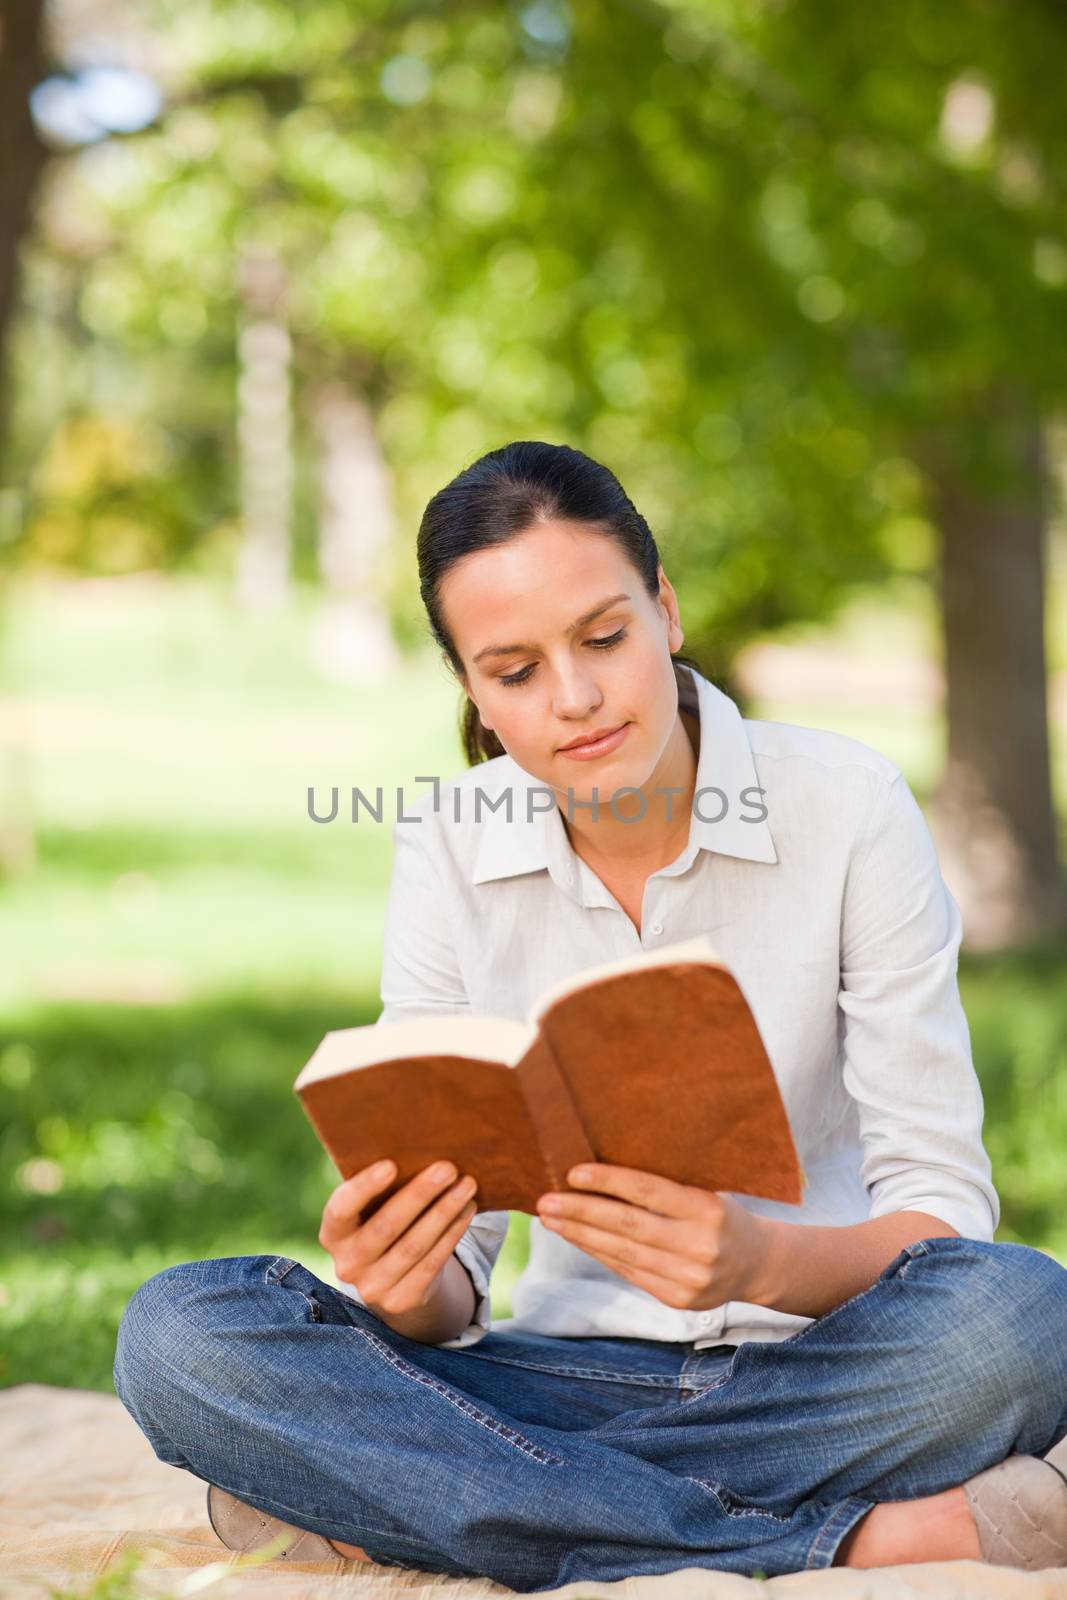 Woman reading in the park during the summer